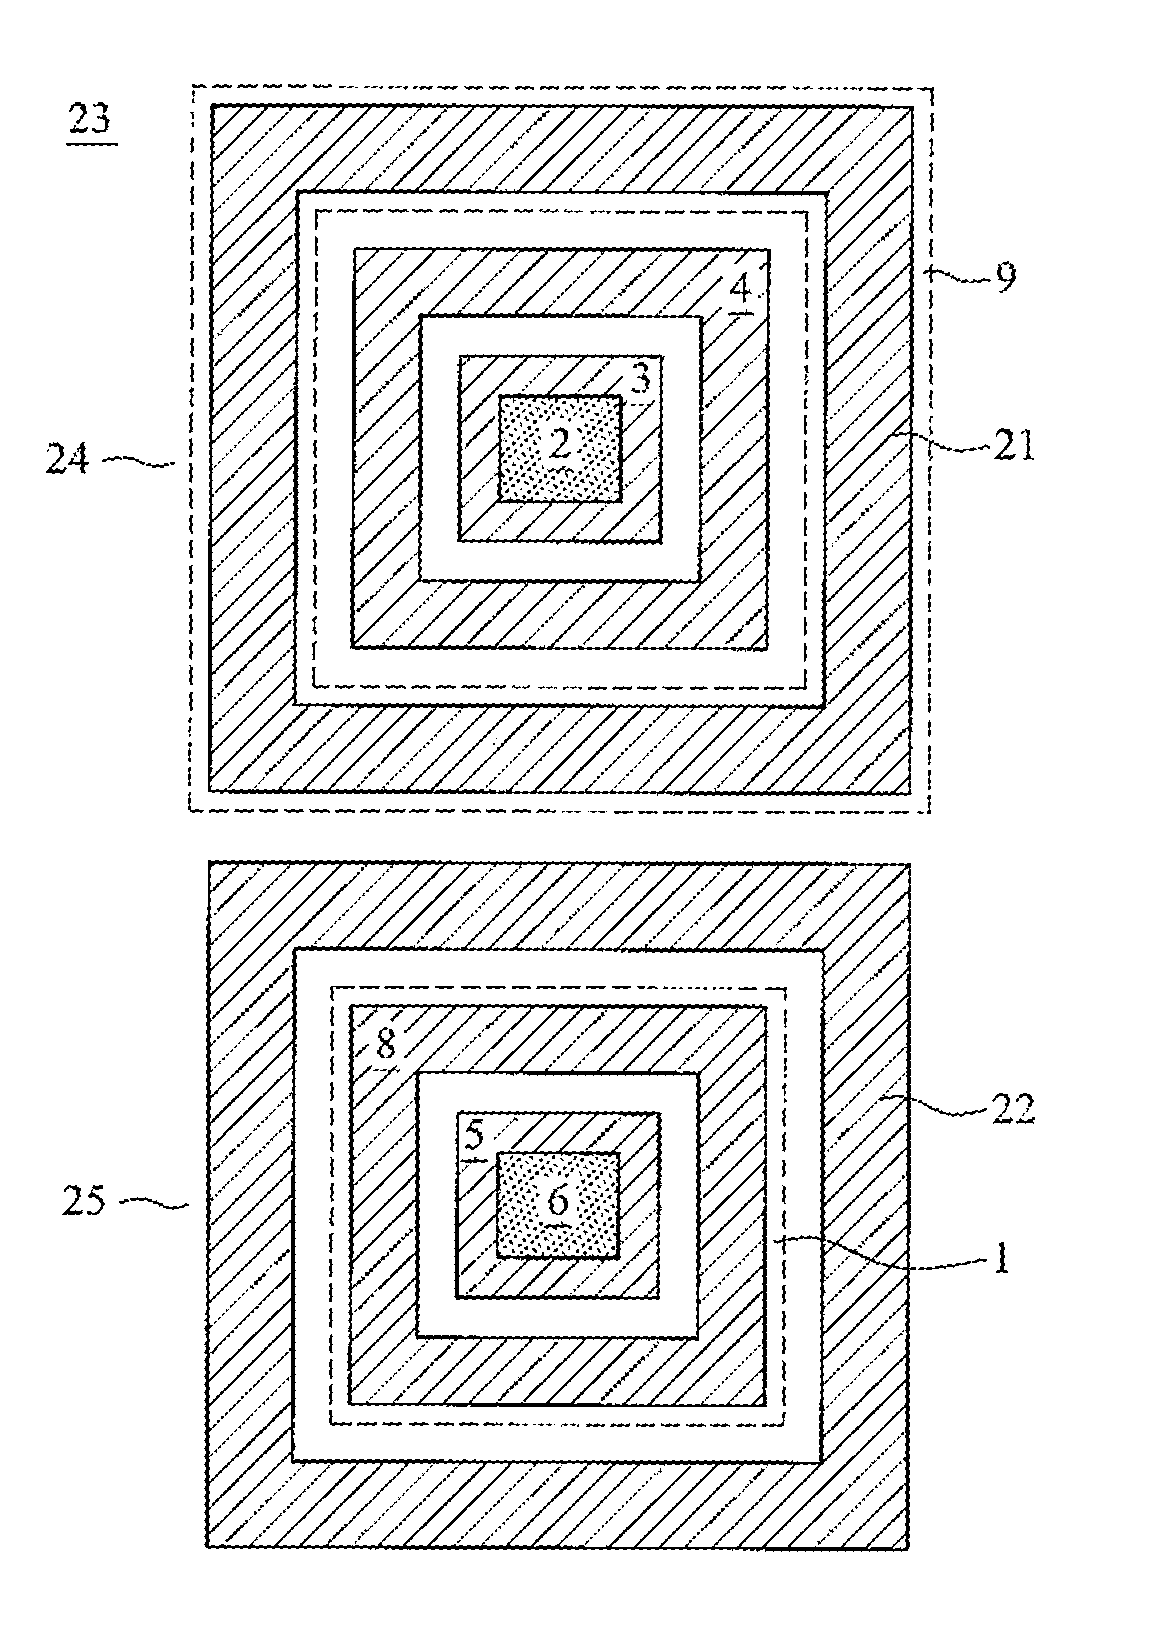 ESD protection apparatus and circuit thereof